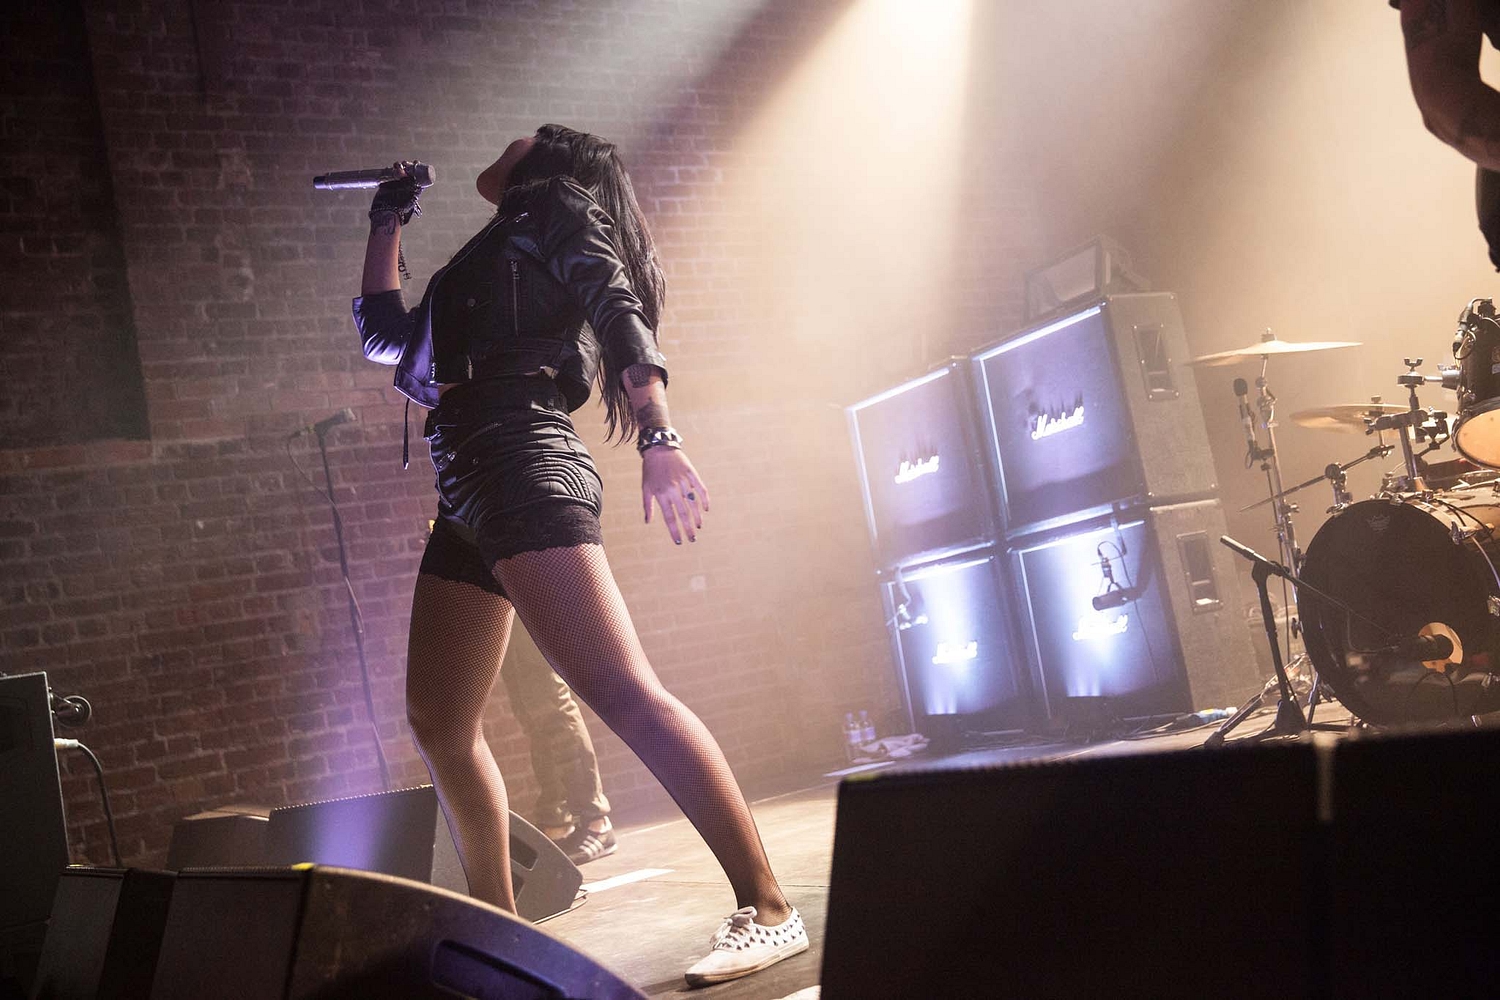 Sleigh Bells and Tink unveil video for ‘That Did It’